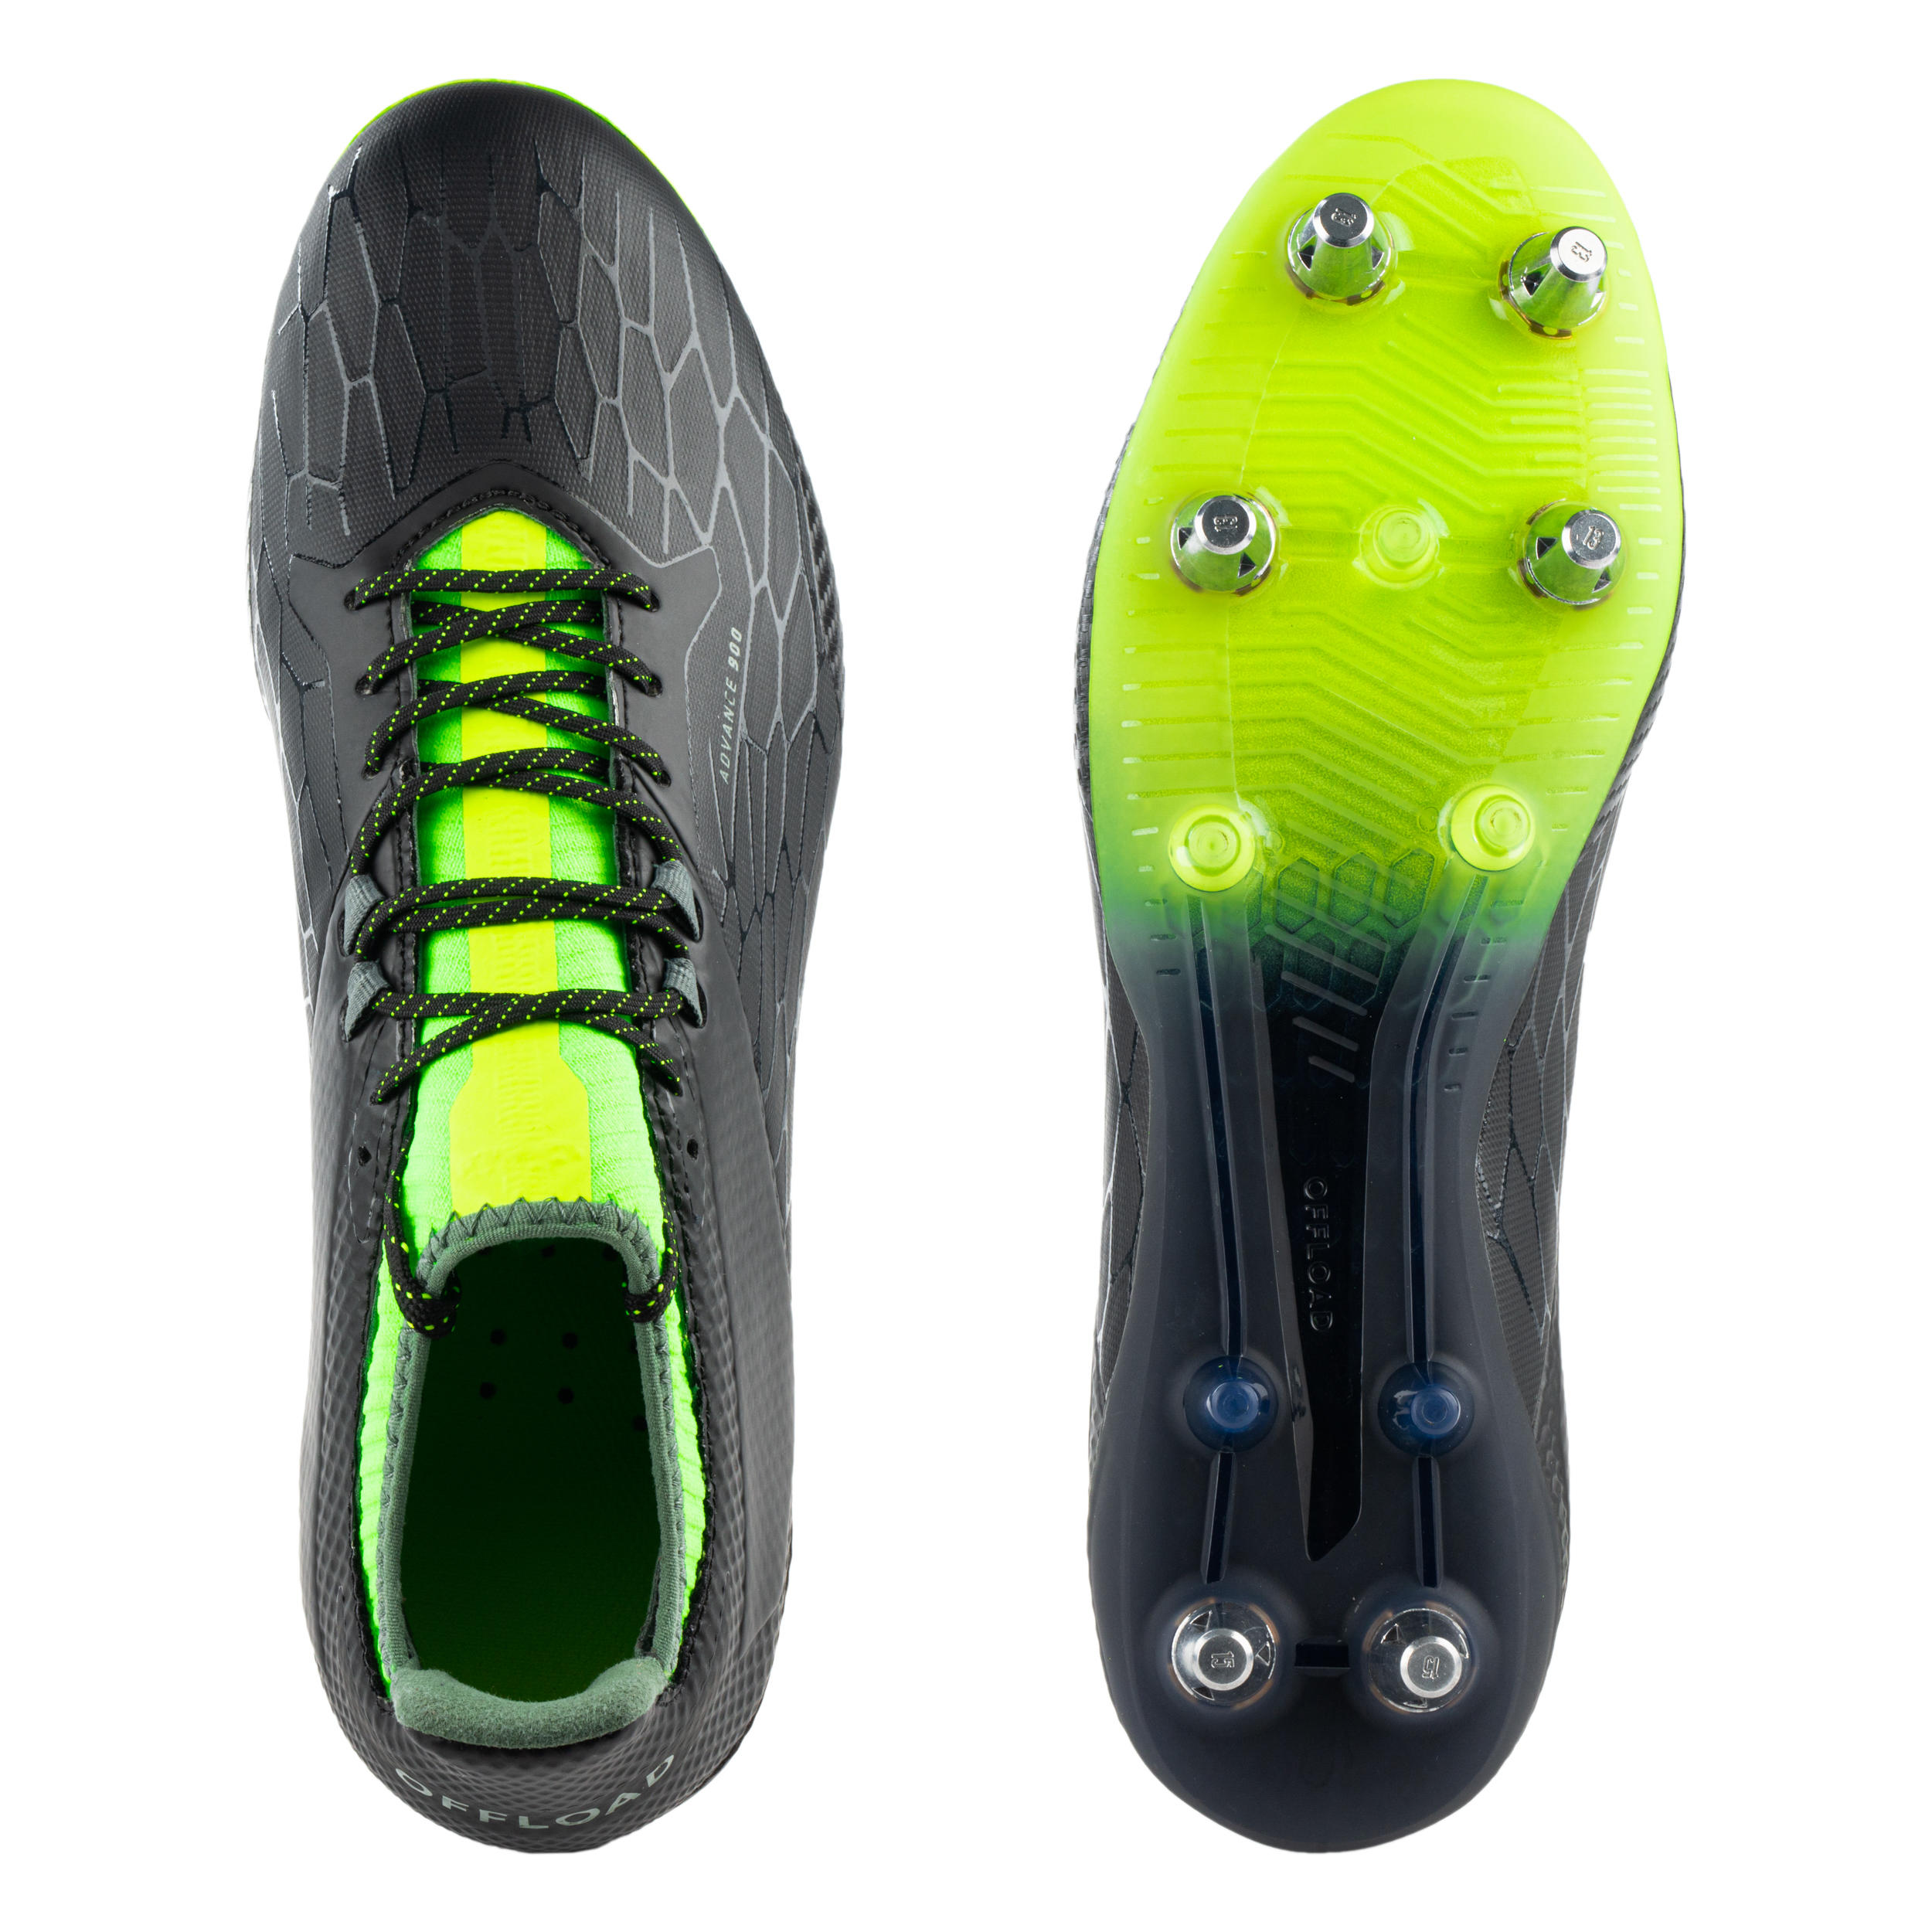 Adult Screw-In Hybrid Rugby Boots Advance R900 SG - Black/Yellow 11/14